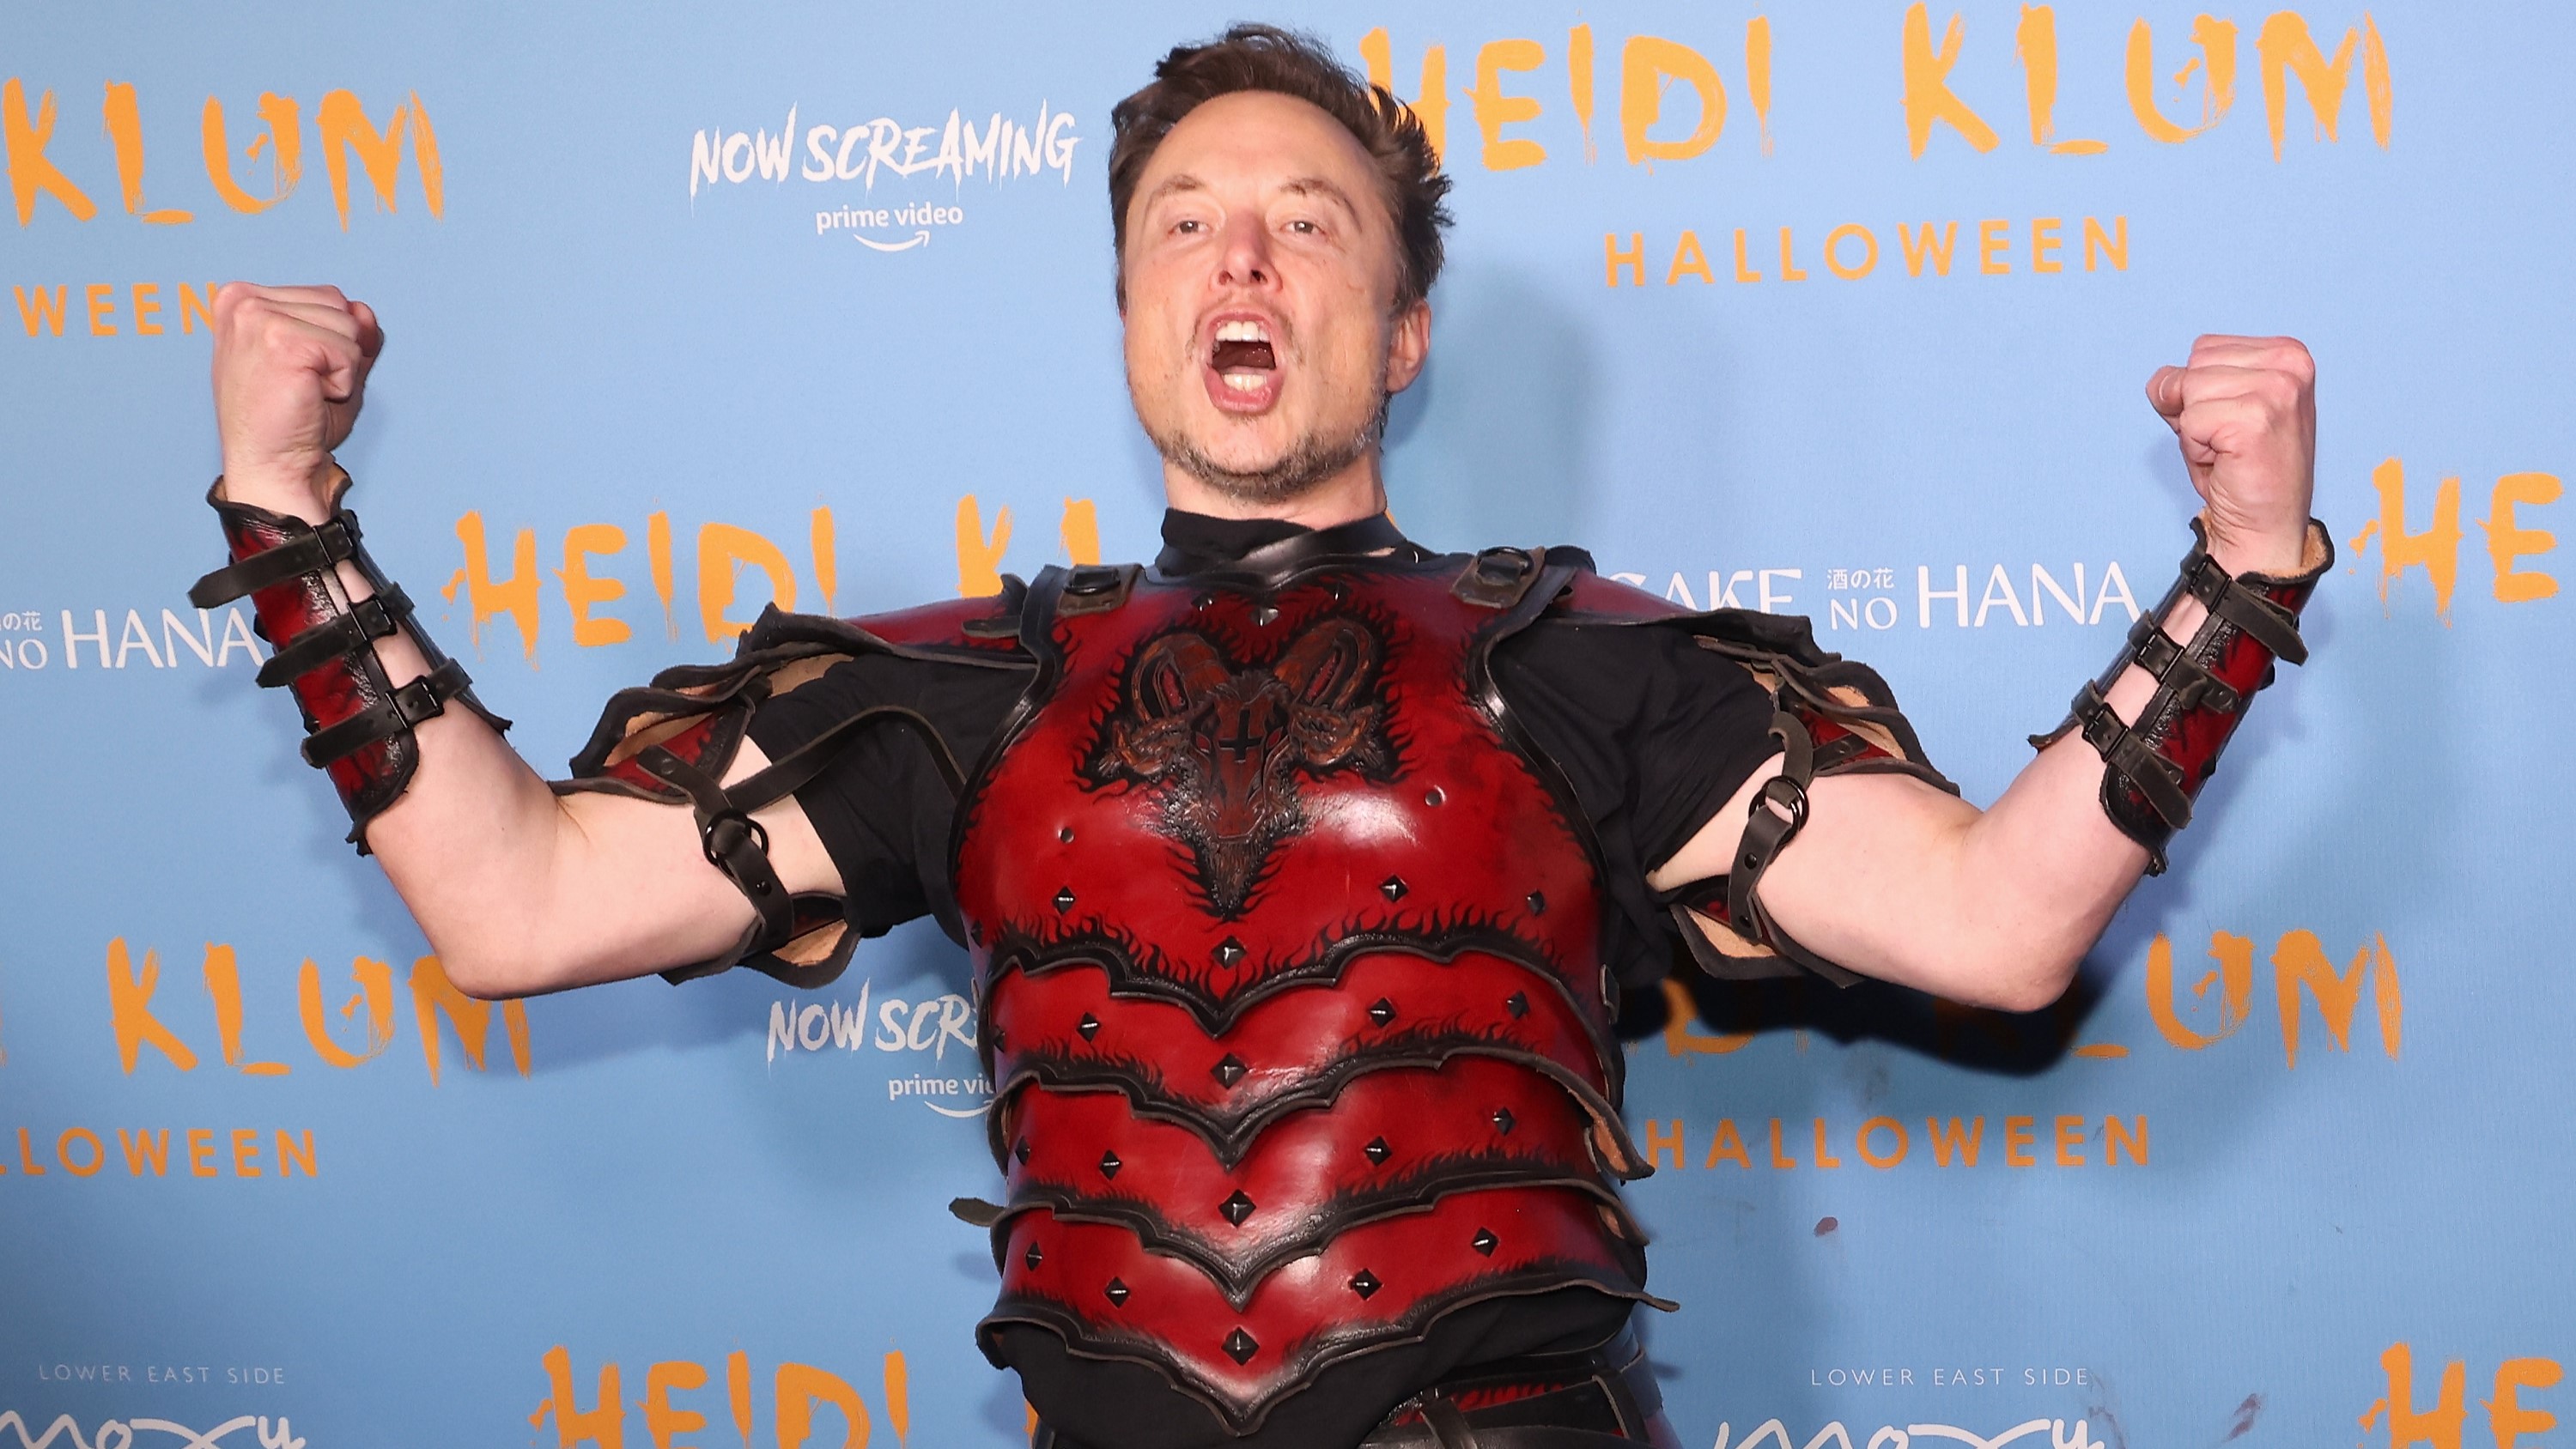 Elon Musk claims he was once one of the best Quake players around, everyone laughs, but wait: The actual best Quake player ever says Musk ‘wasn’t very good, but he’s still an OG’